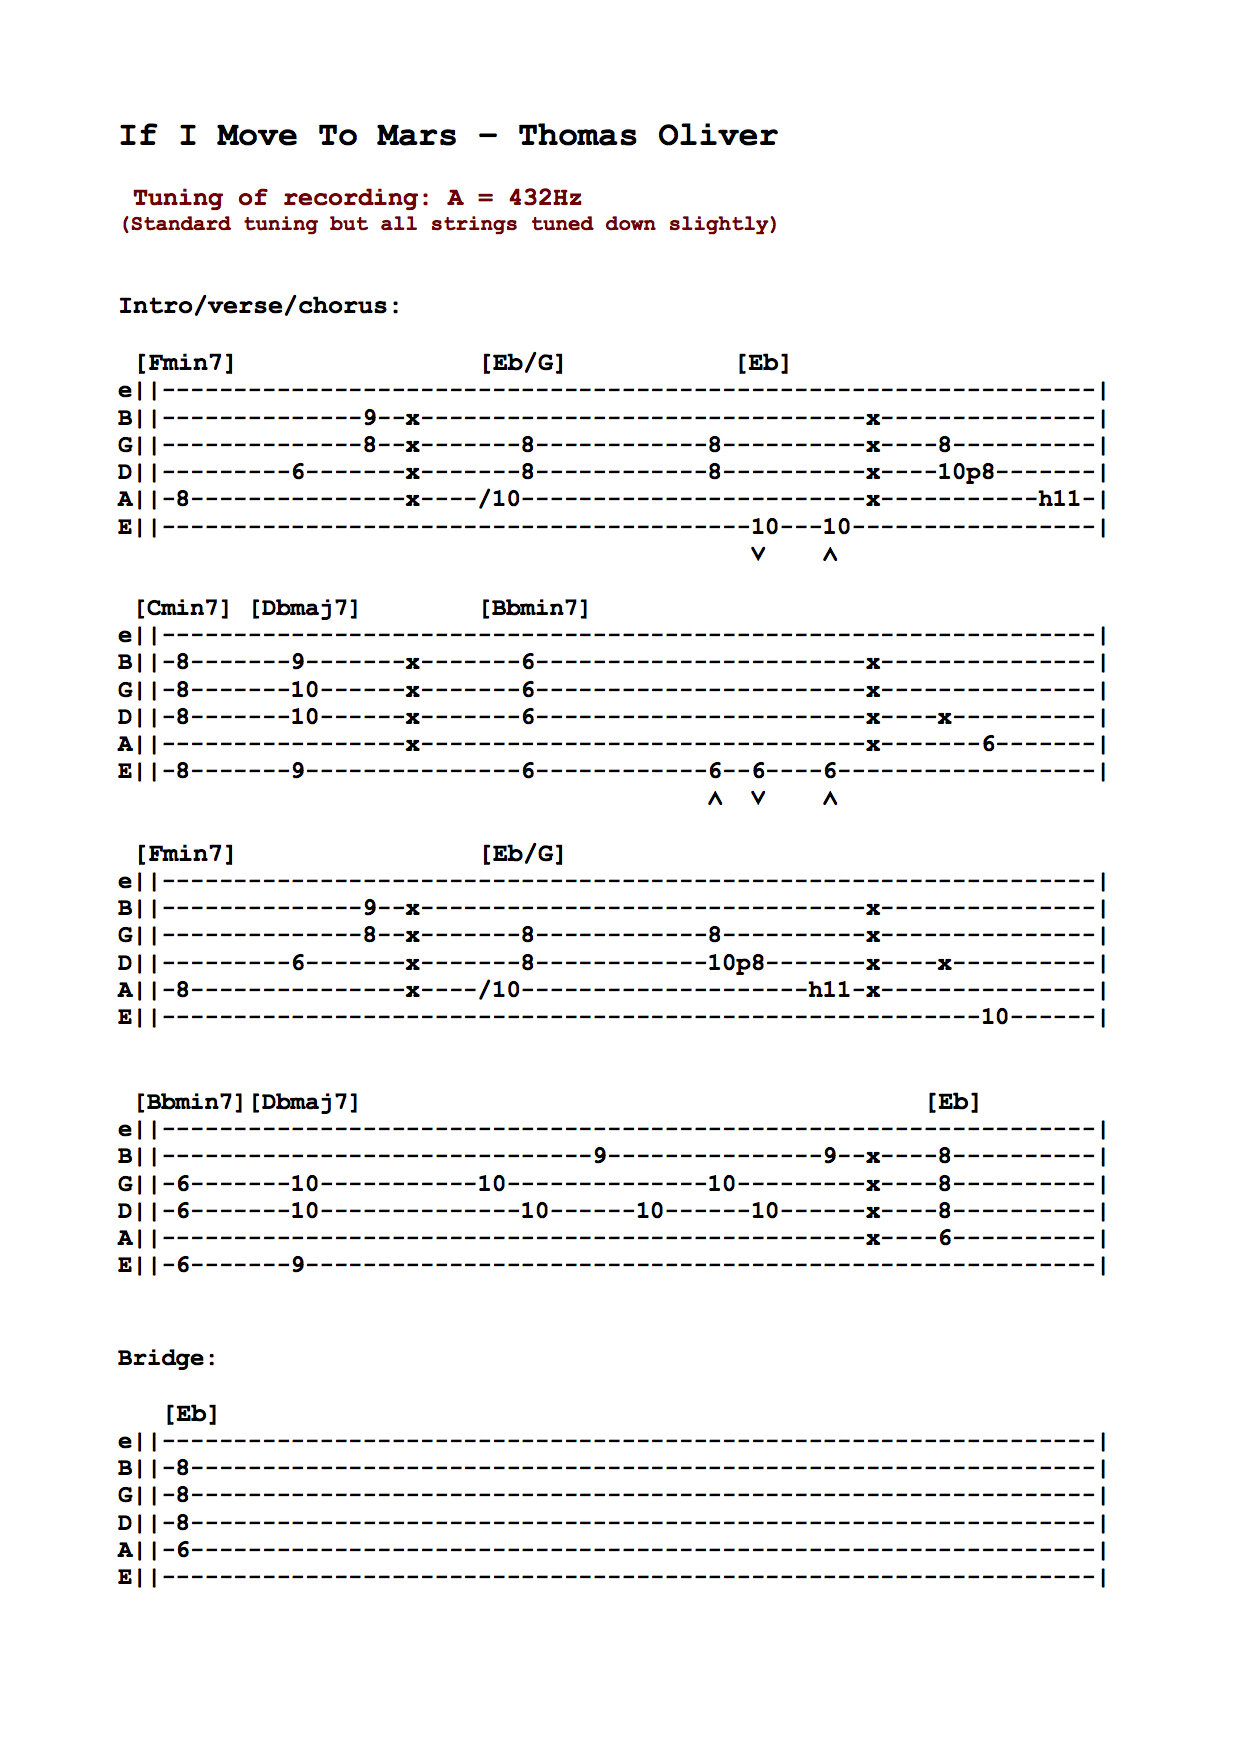 Boris The Spider by The Who - Guitar Tab - Guitar Instructor